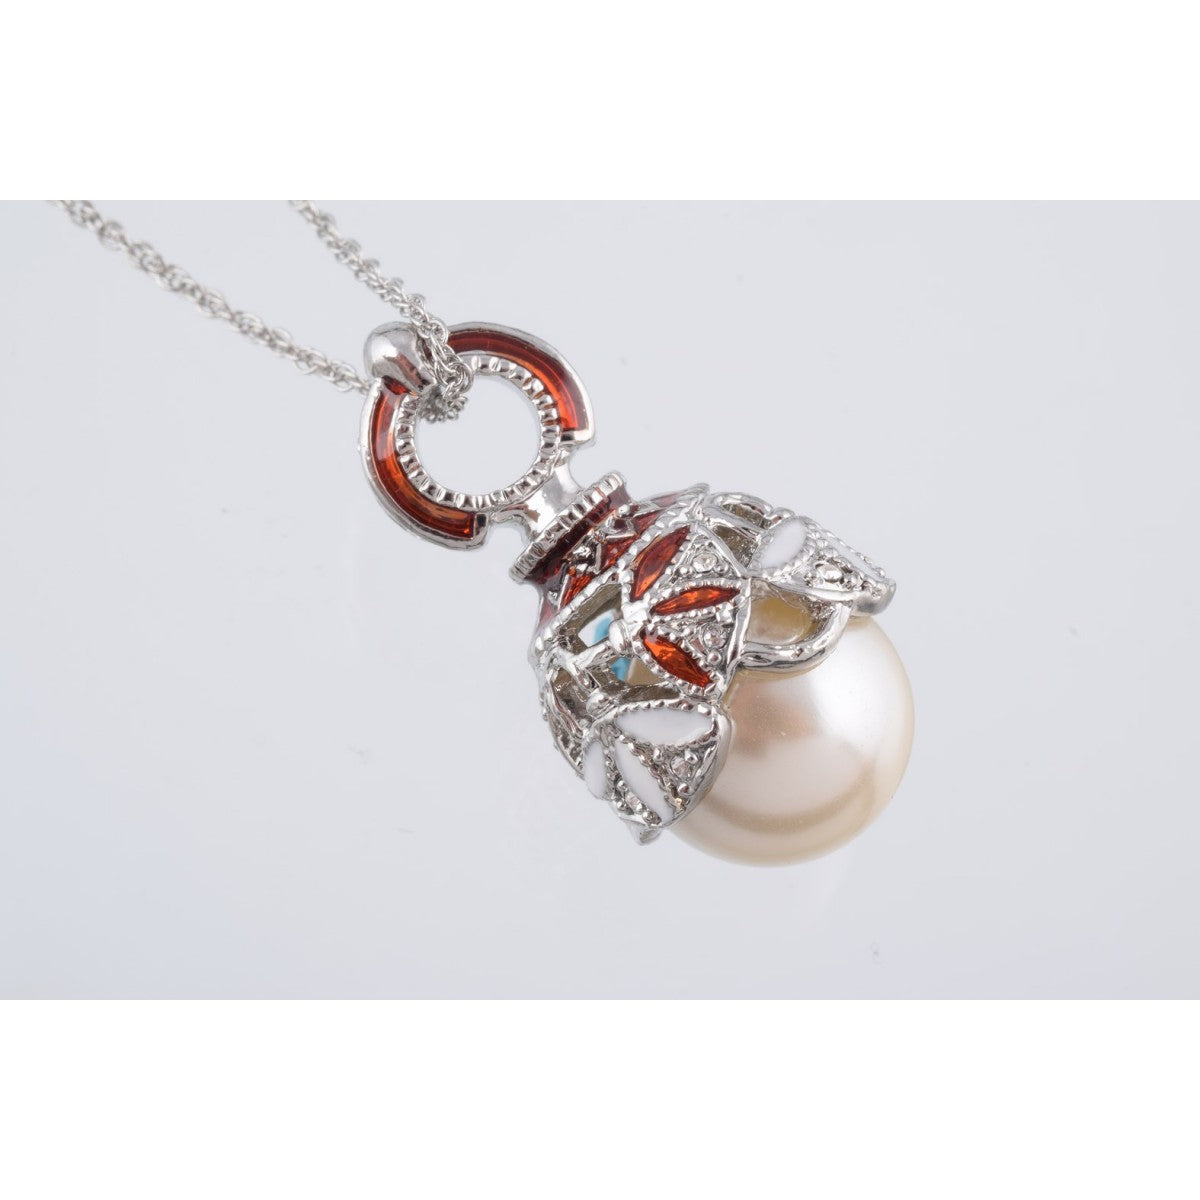 Silver & Red Pearl Fabrege Egg Styled Pendant Necklace